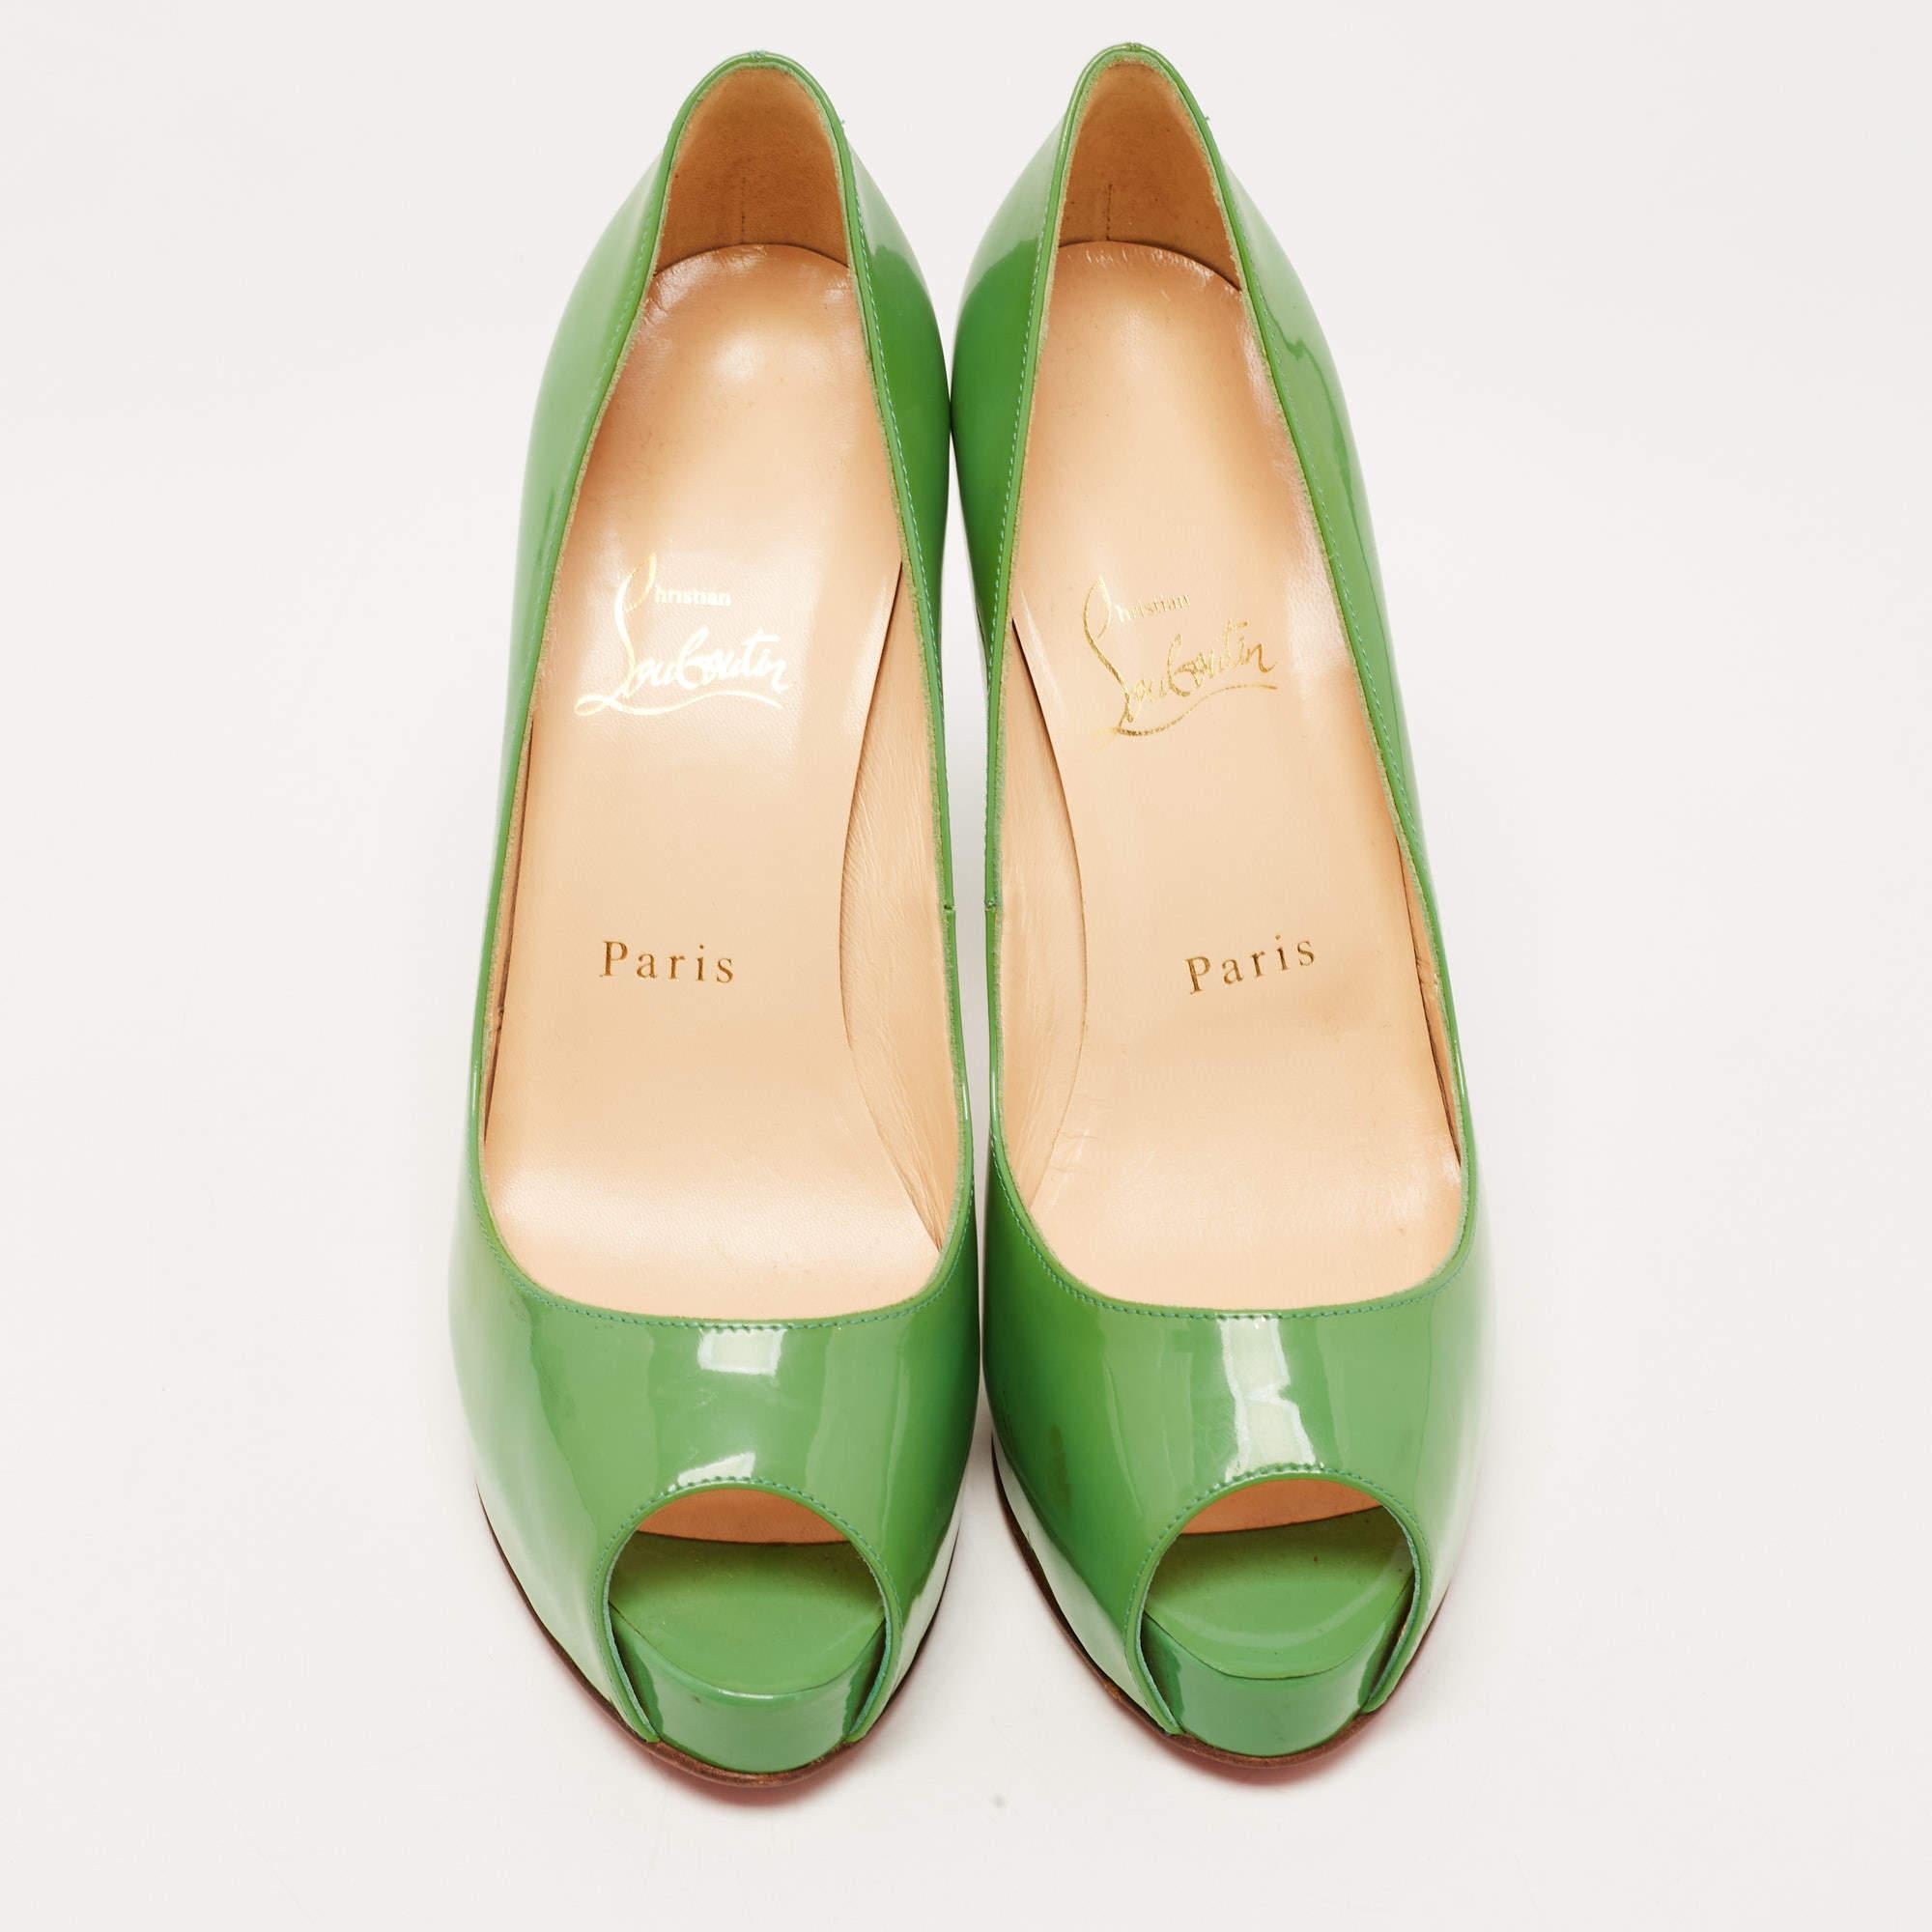 Christian Louboutin Green Patent Leather Very Prive Pumps Size 38.5 In Good Condition For Sale In Dubai, Al Qouz 2